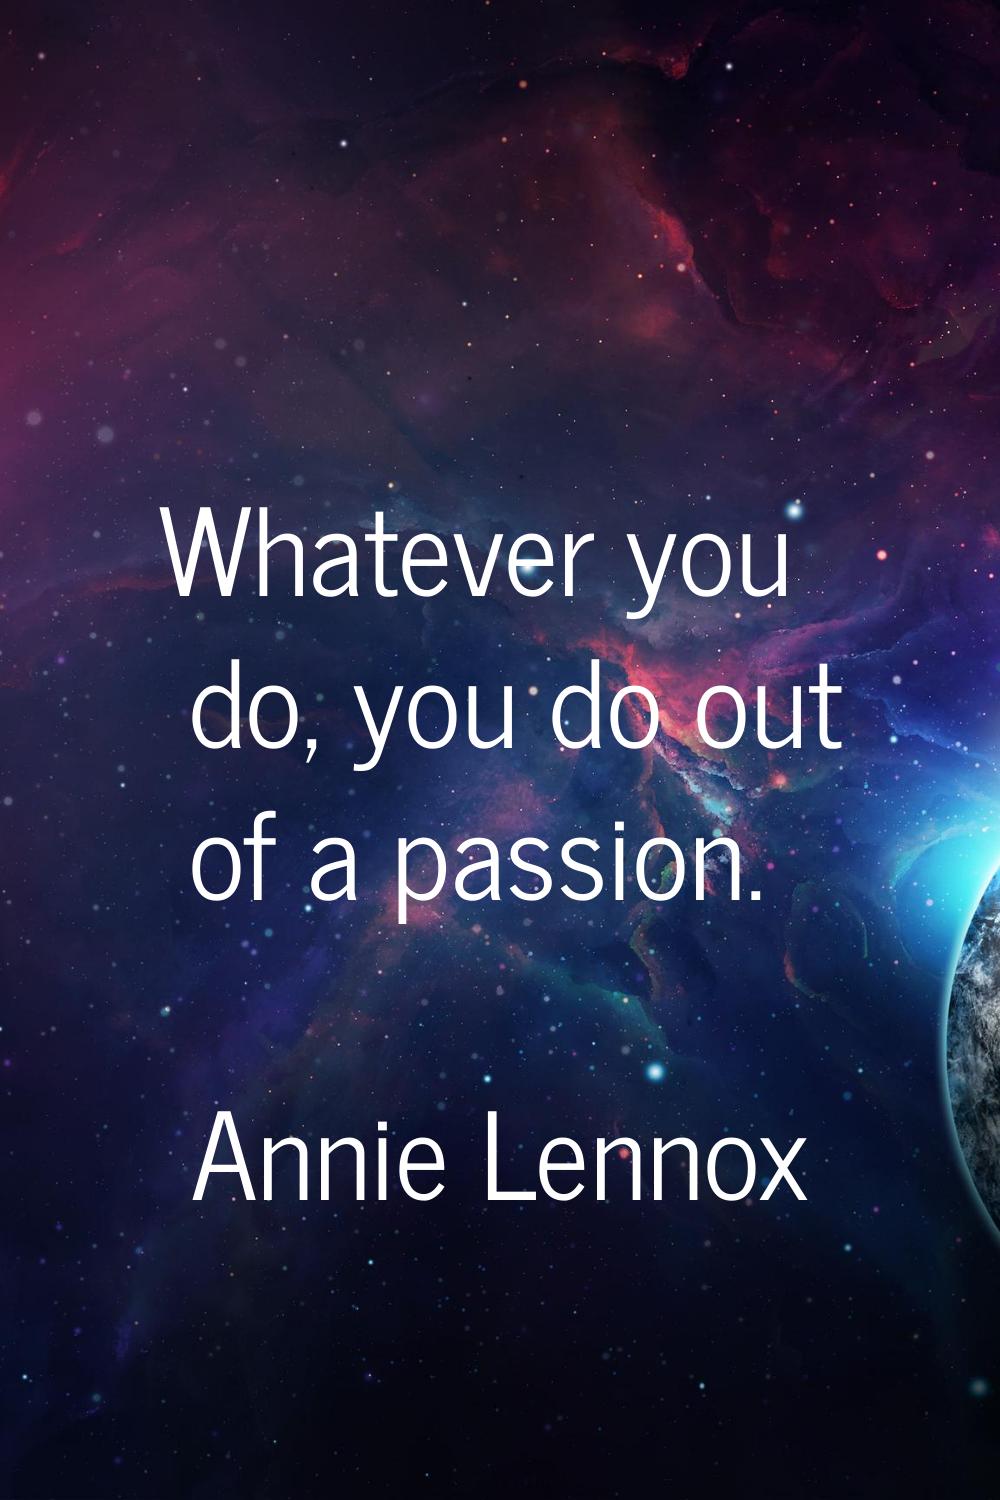 Whatever you do, you do out of a passion.